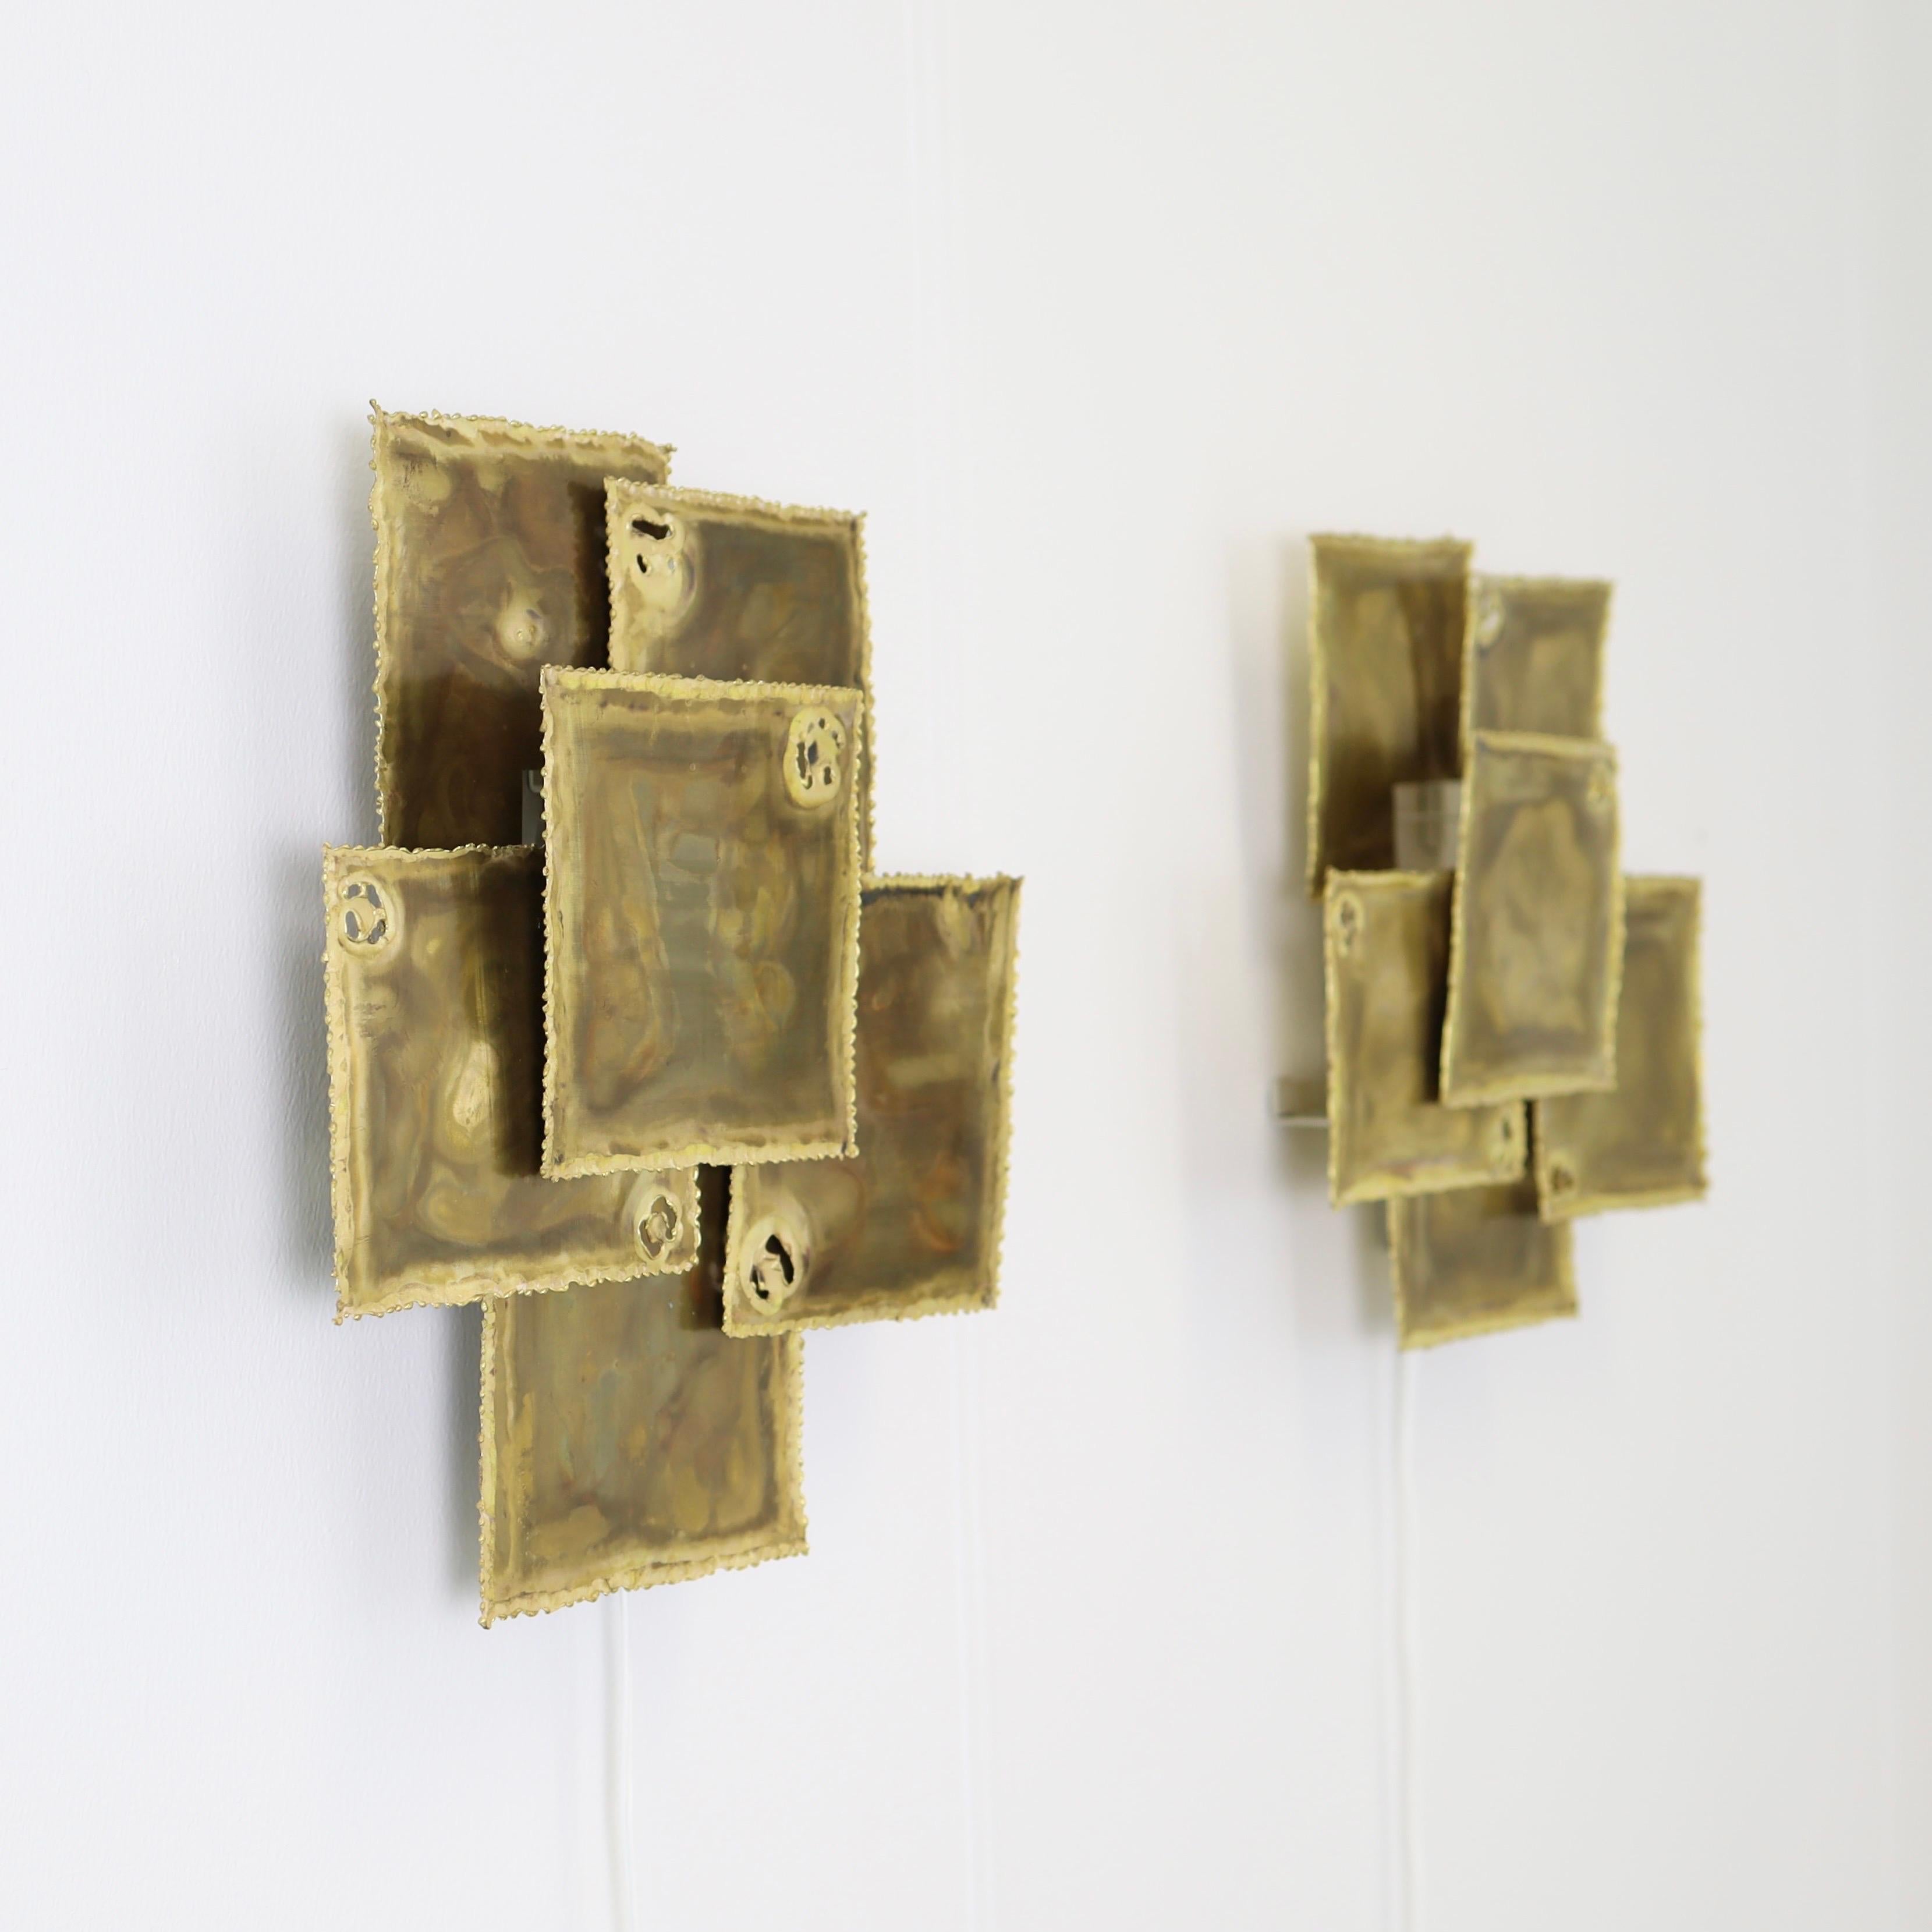 Pair of Large Brass Wall Lamps by Svend Aage Holm Sorensen, 1960s, Denmark For Sale 7